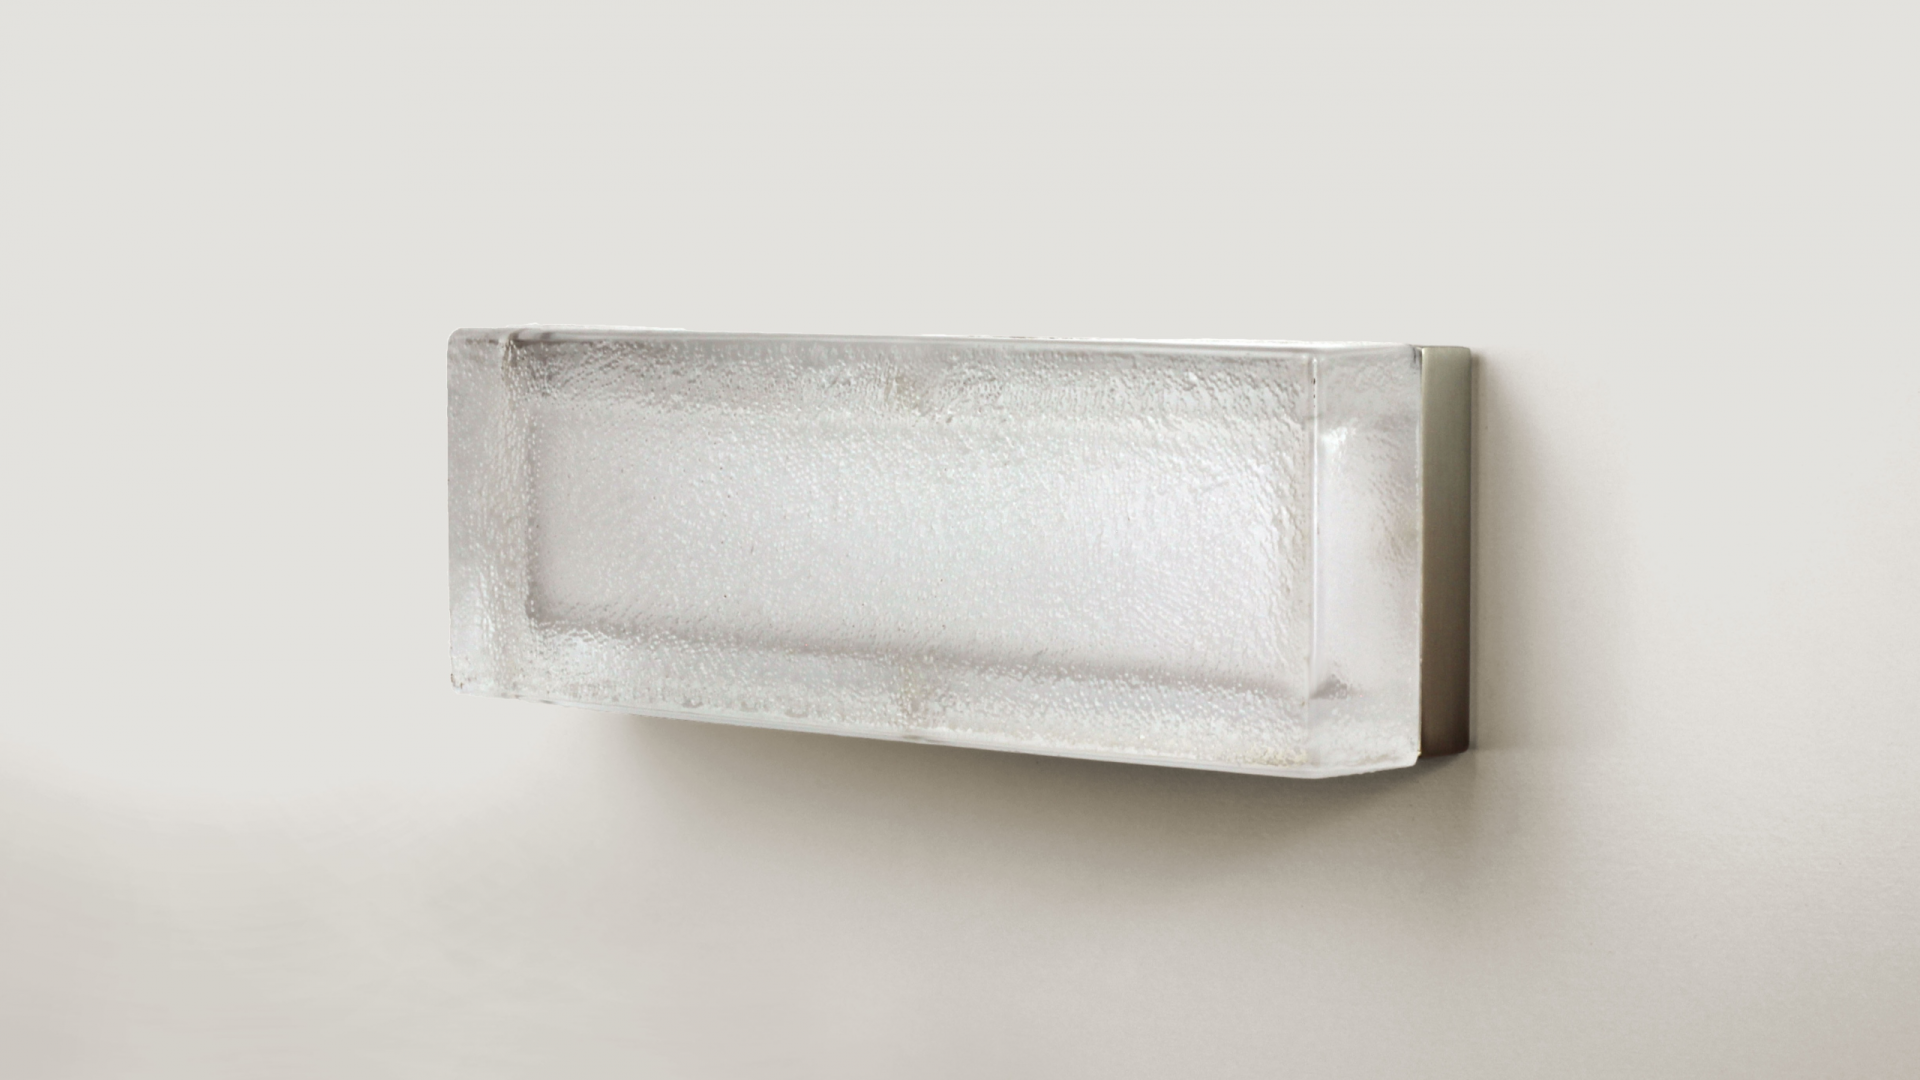 Textured glass luminaire shown wall mounted without the fixture turned on.